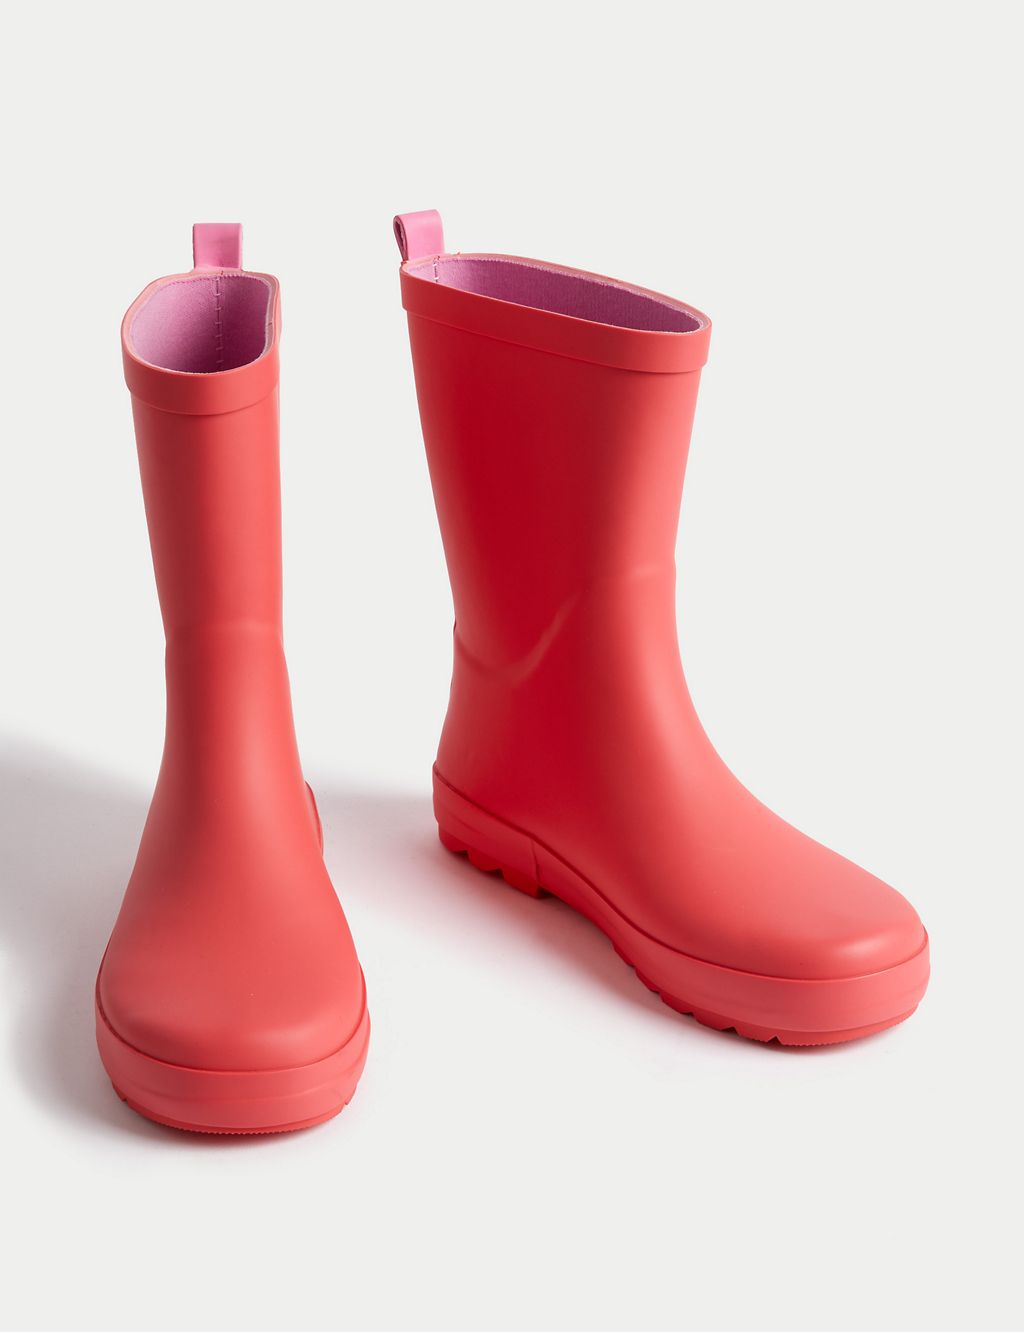 Kids' Wellies (4 Small - 6 Large) 1 of 4